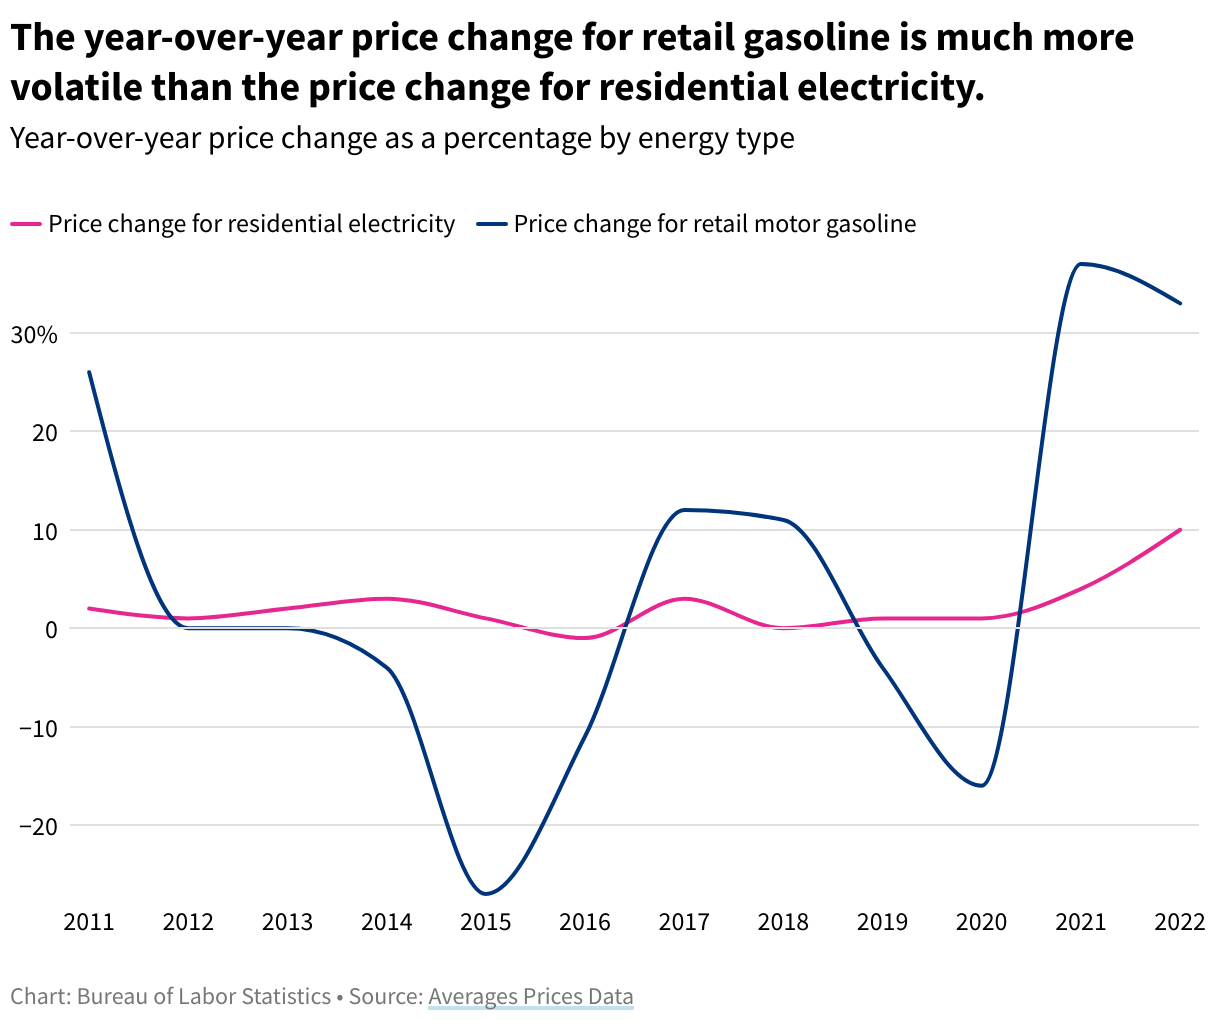 A line graph depicting the year-over-year price change as a percentage for residential electricity and retail gasoline.